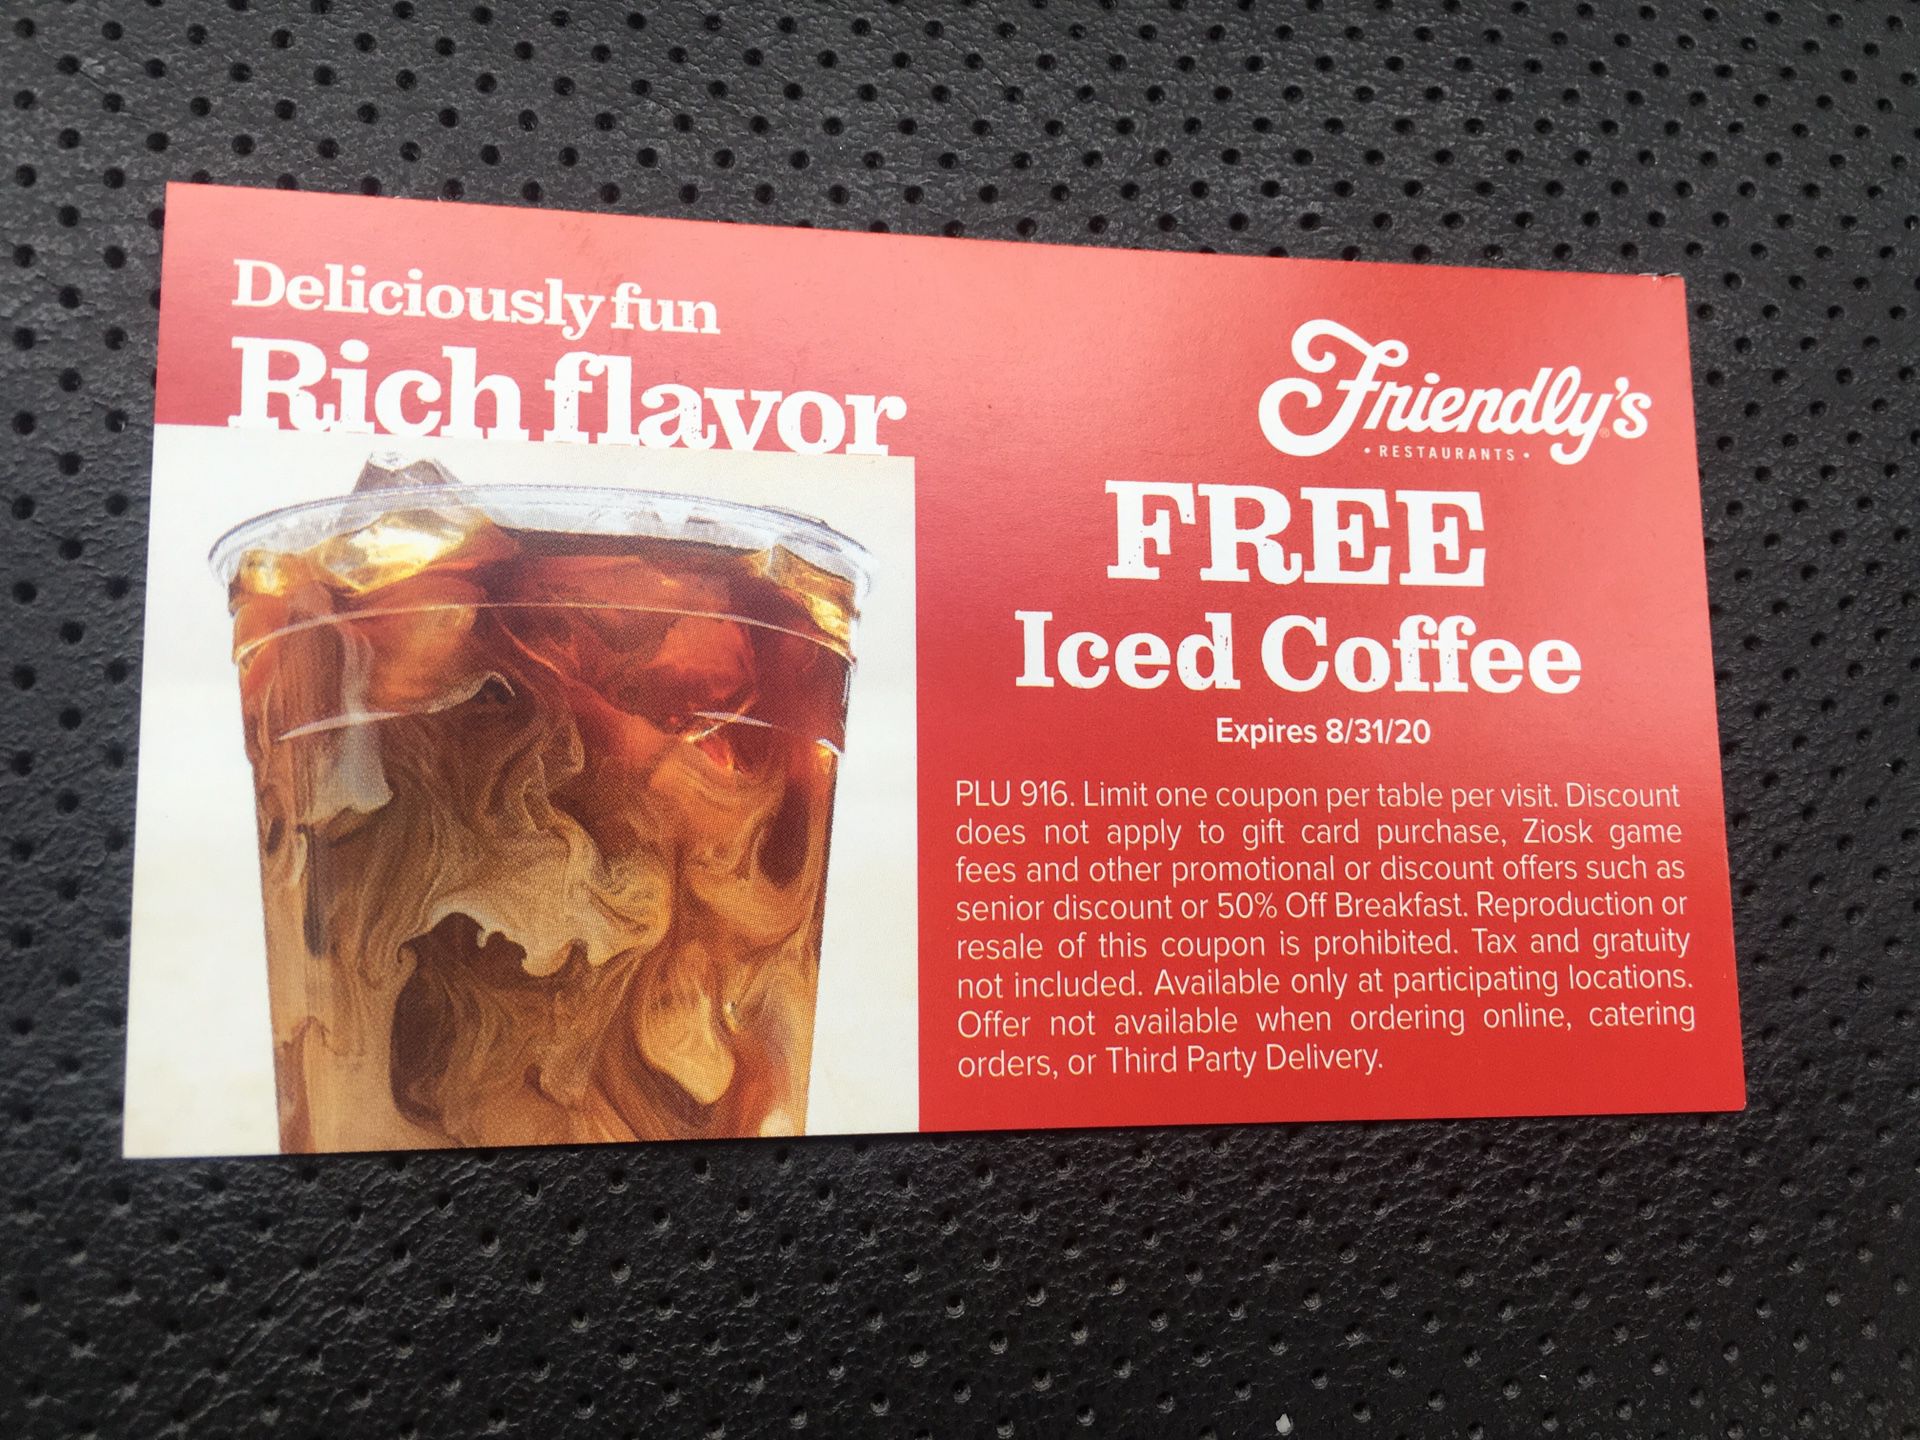 FRIENDLY’S FREE ICED COFFEE VOUCHERS - 52 COUNT